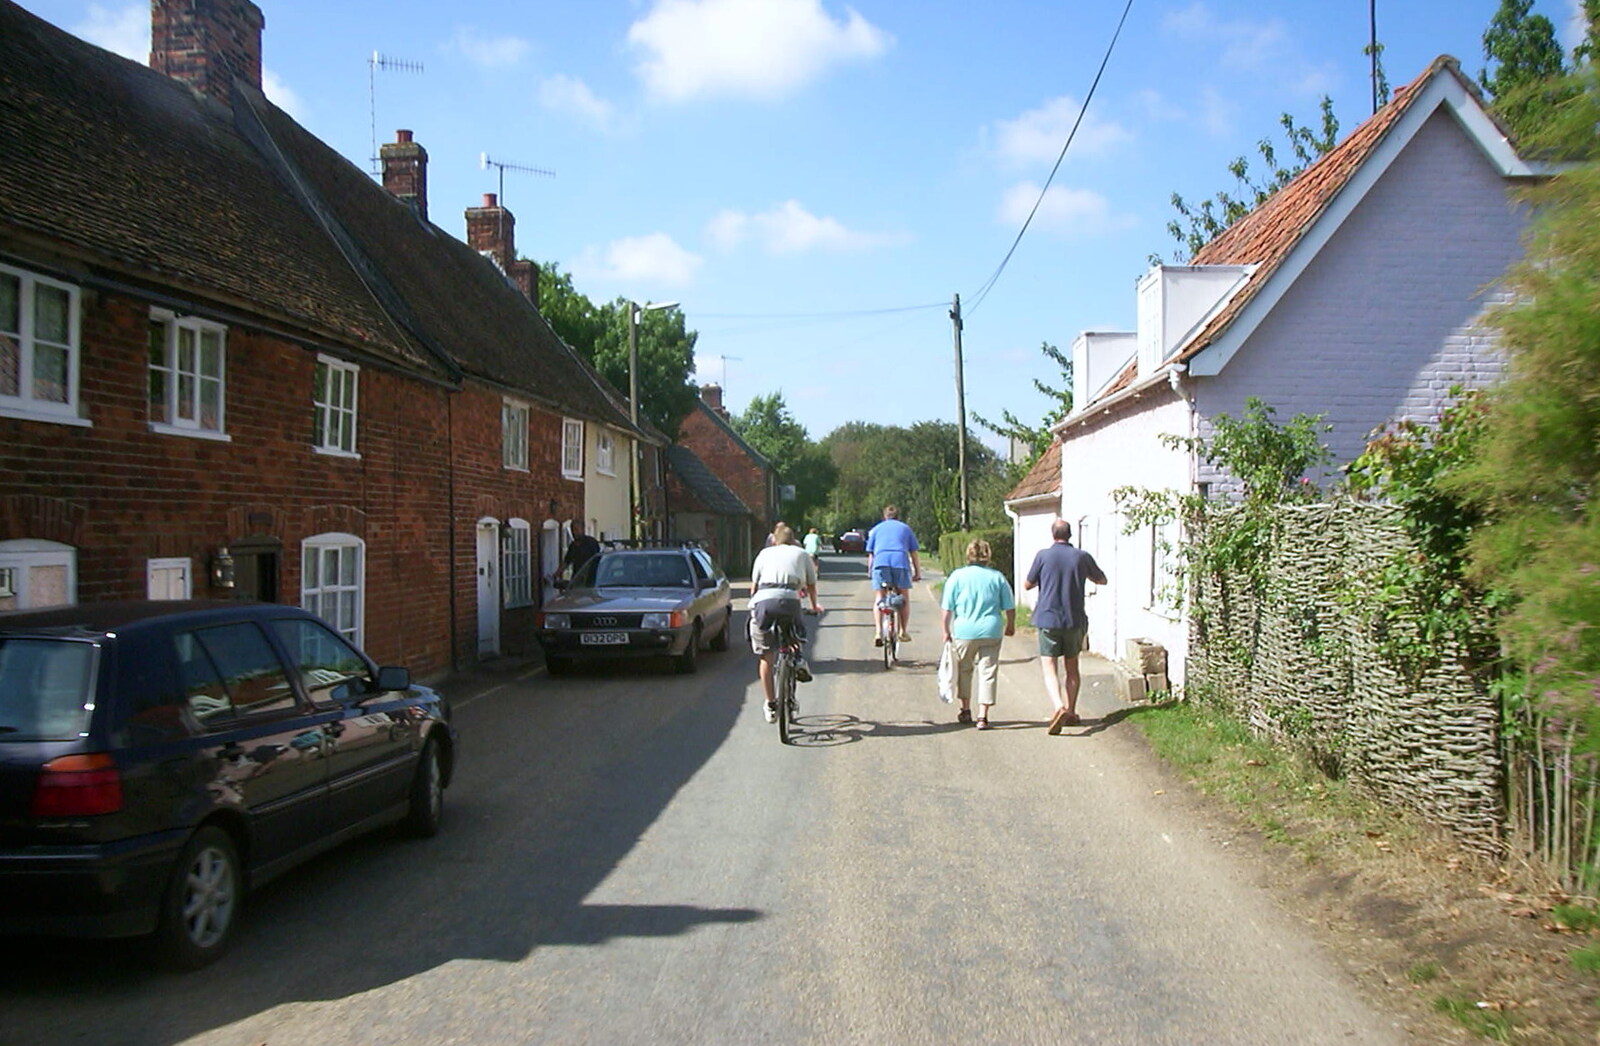 A BSCC Splinter Group Camping Weekend, Theberton, Suffolk - 11th August 2002: Cycling on Quay Street